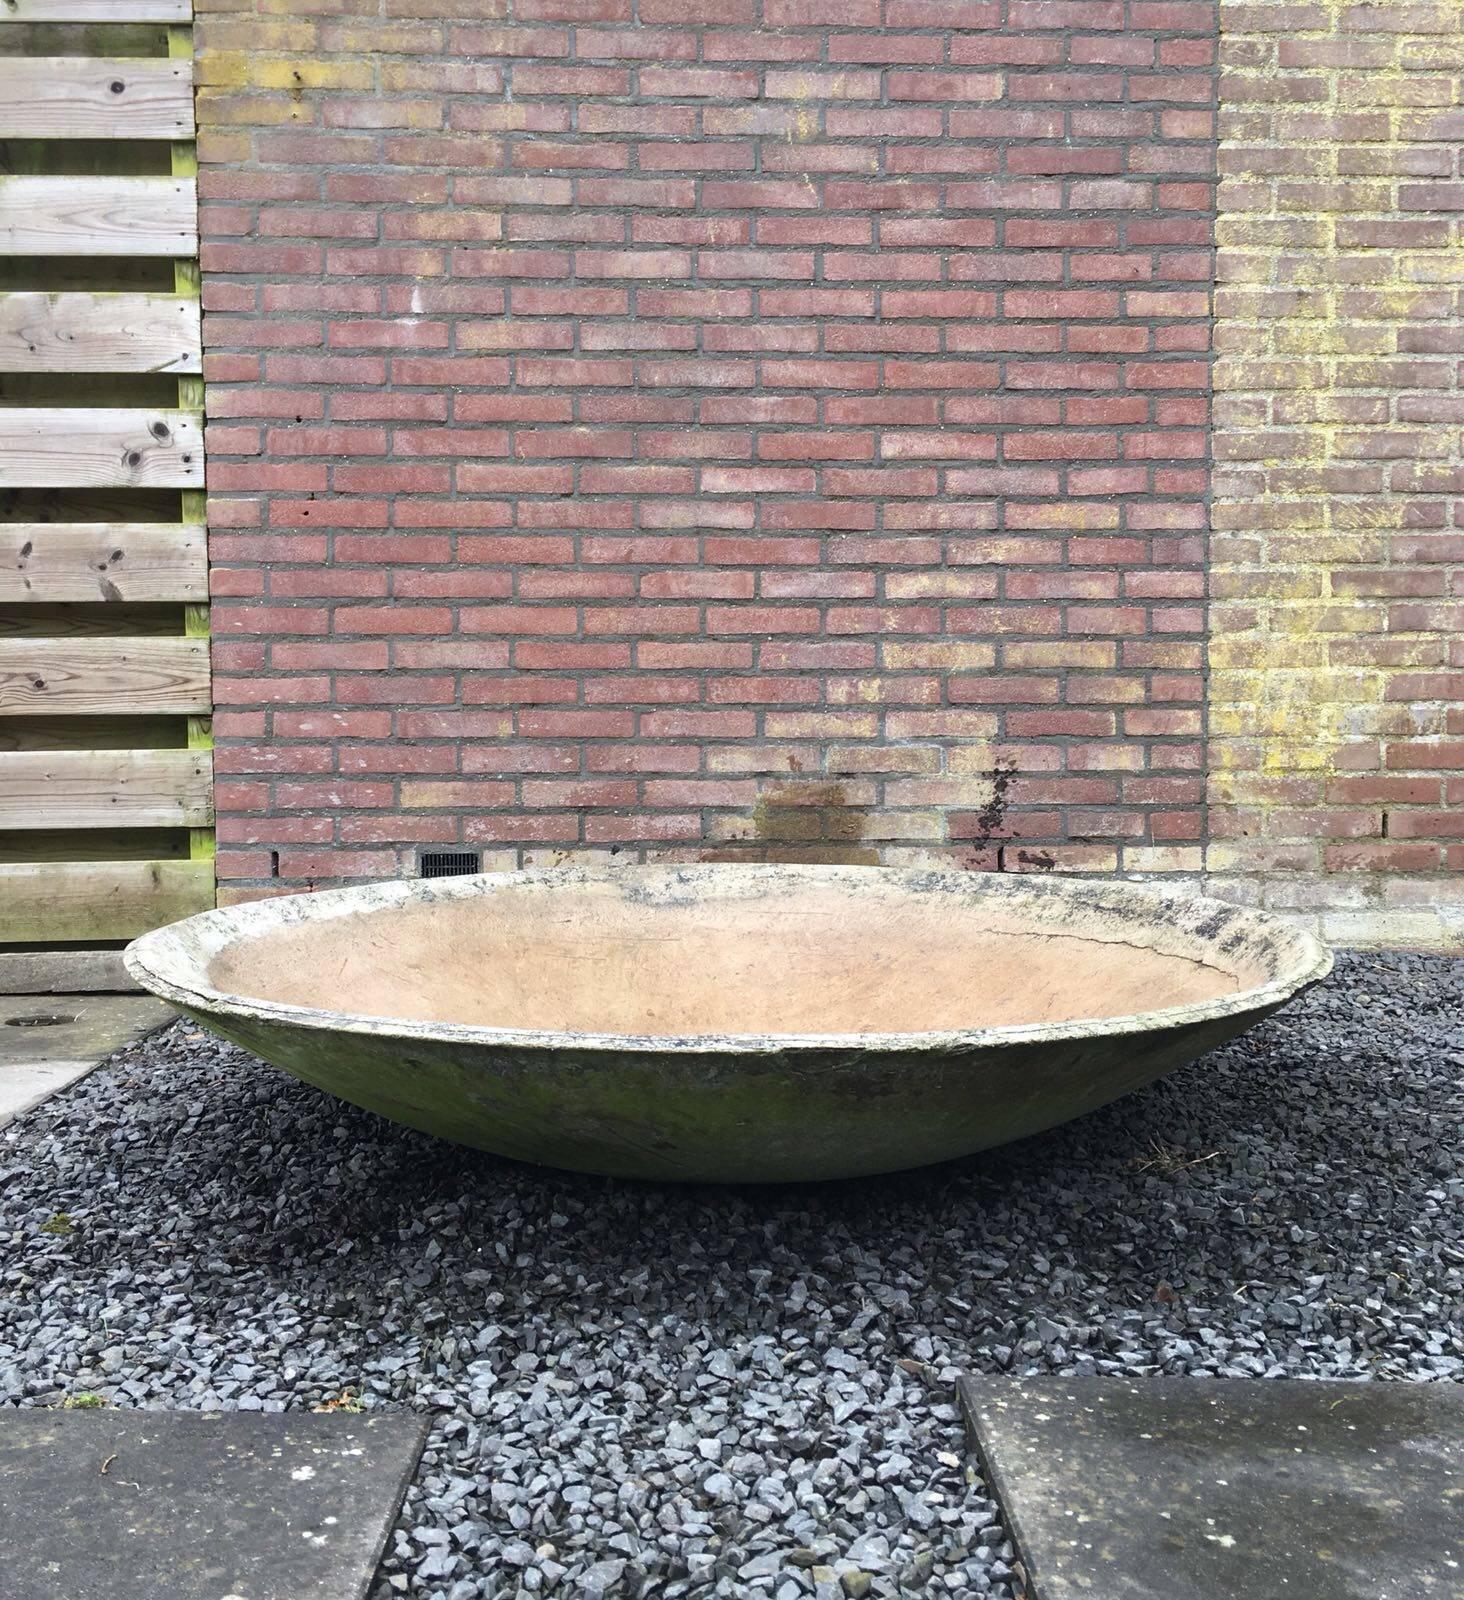 This huge fibre cement garden element was designed by the Swiss architect Willy Guhl for Eternit in circa 1950s-1960s. Absolute eye-catcher which remains in good vintage condition. Some wear, consistent with age and use.

 